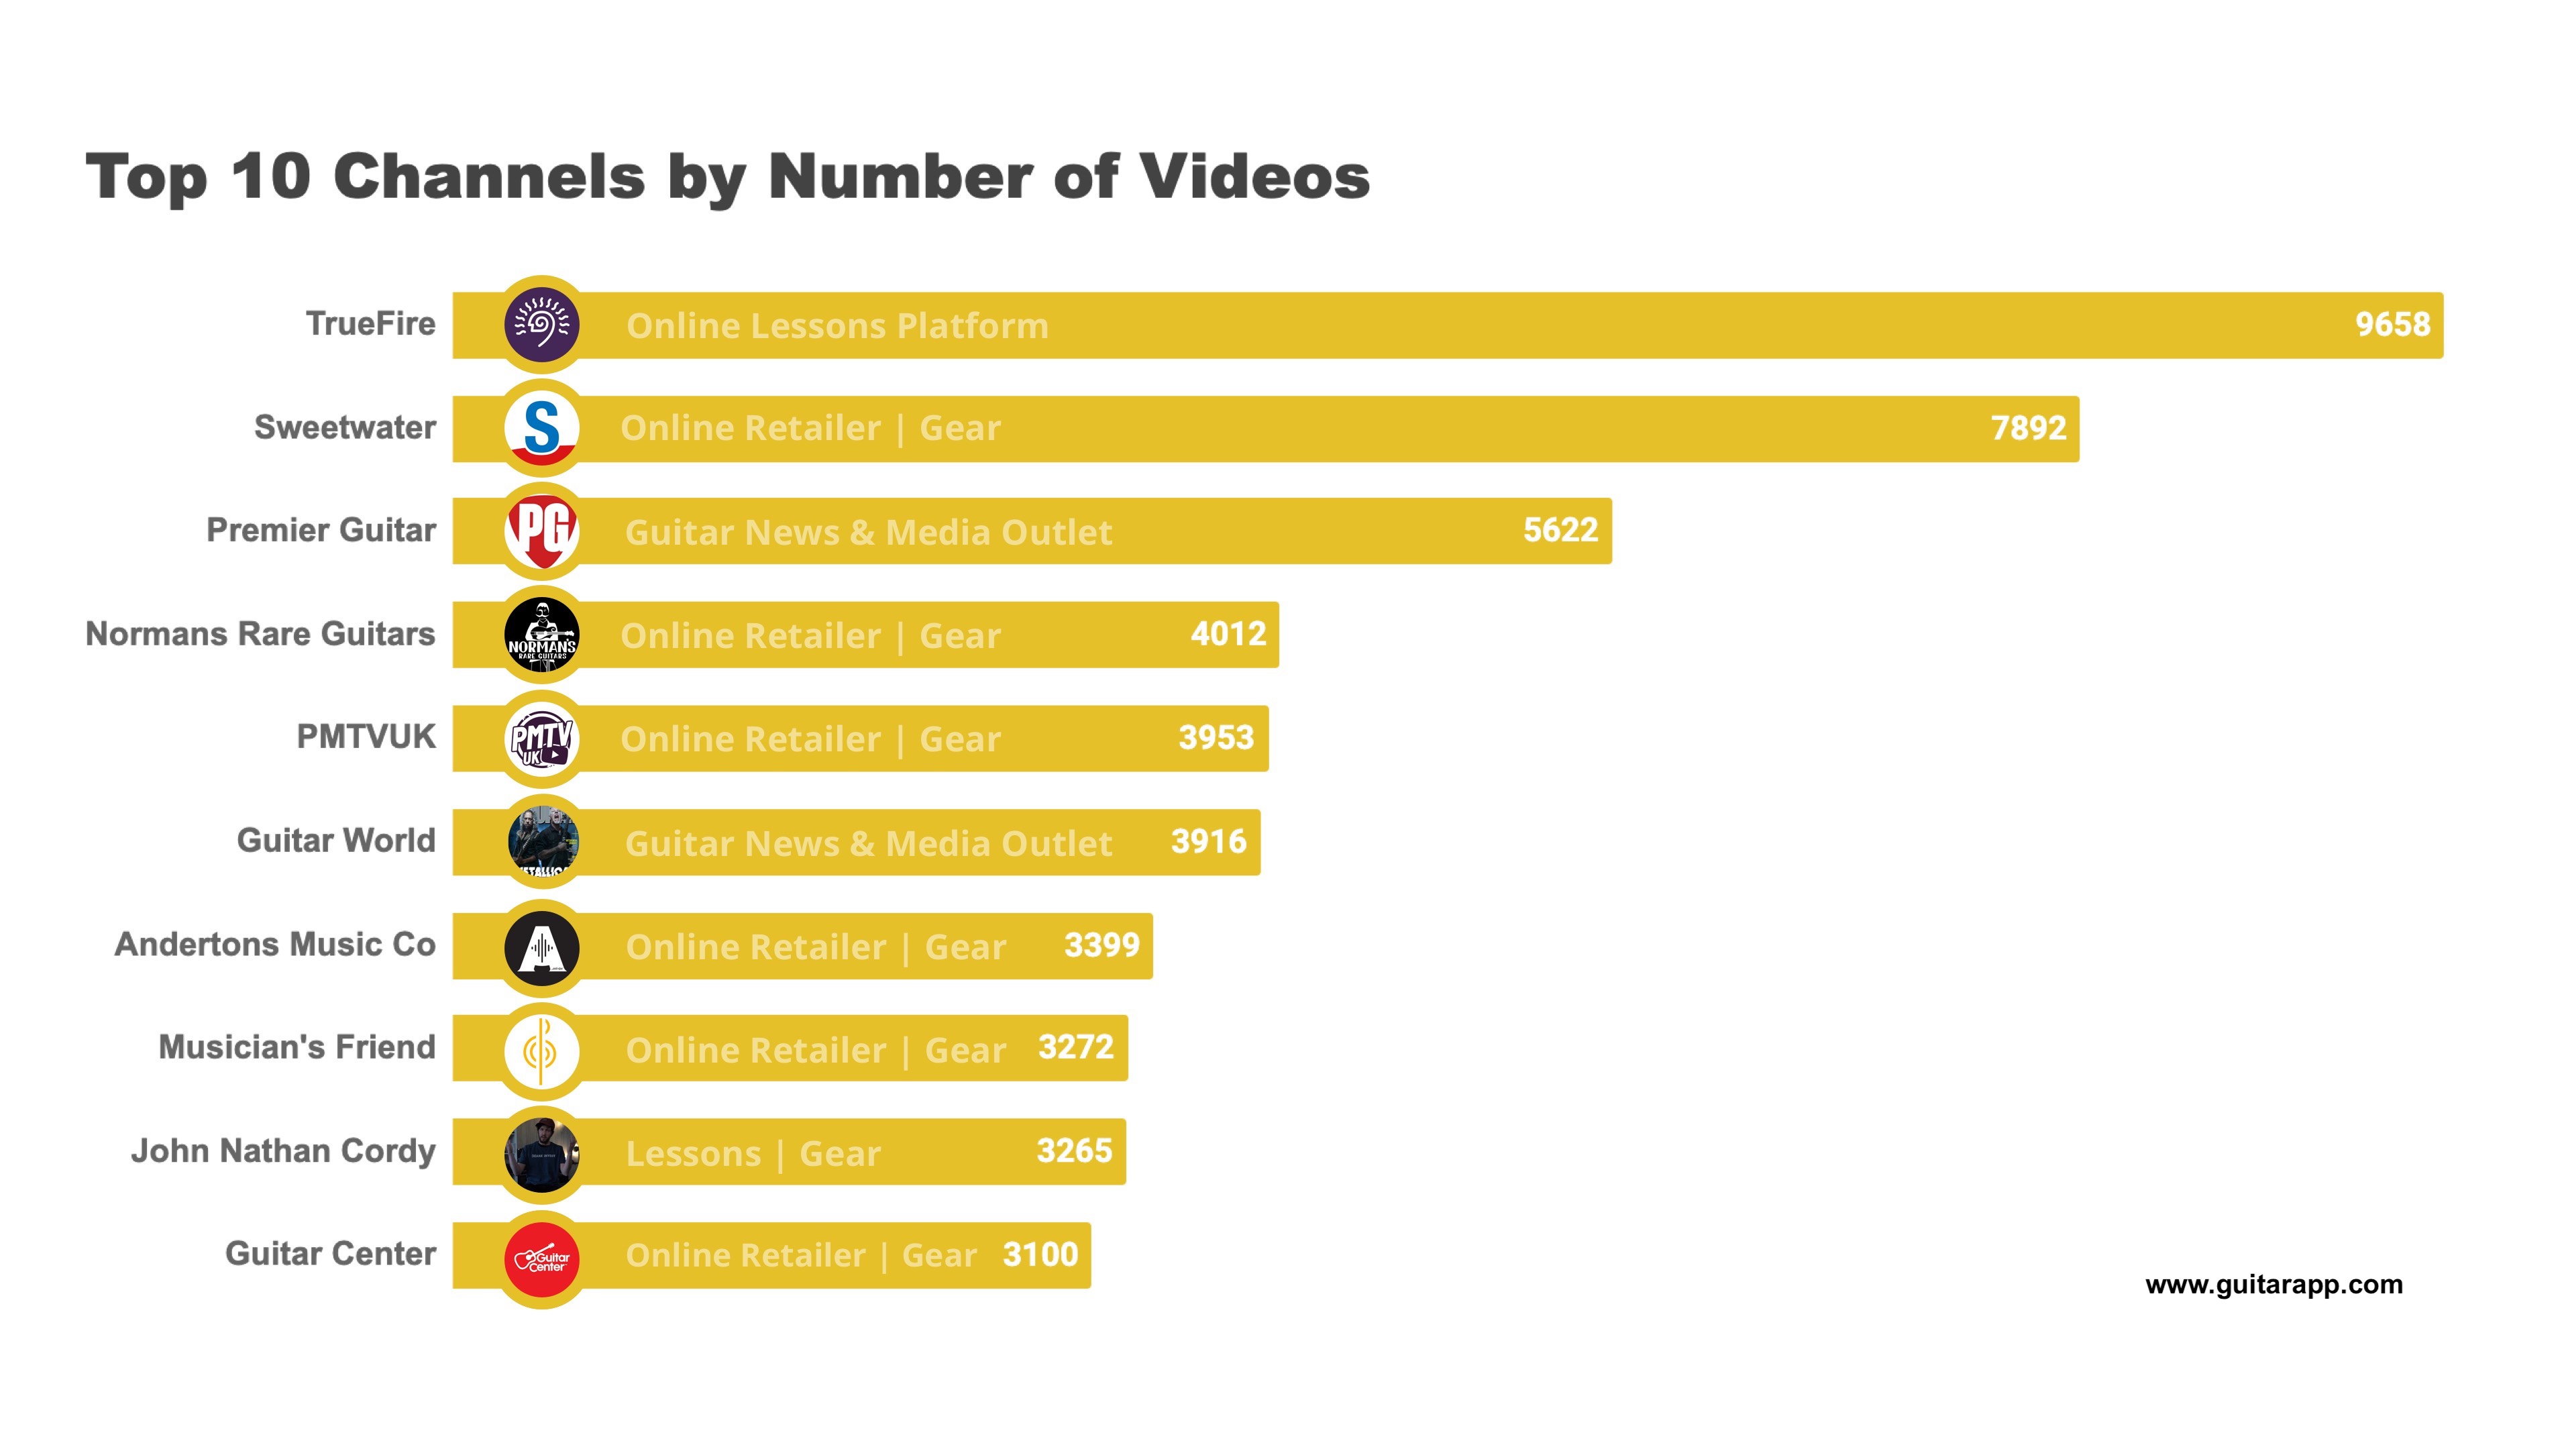 Top 10 YouTube Guitar Channels By Number of Videos